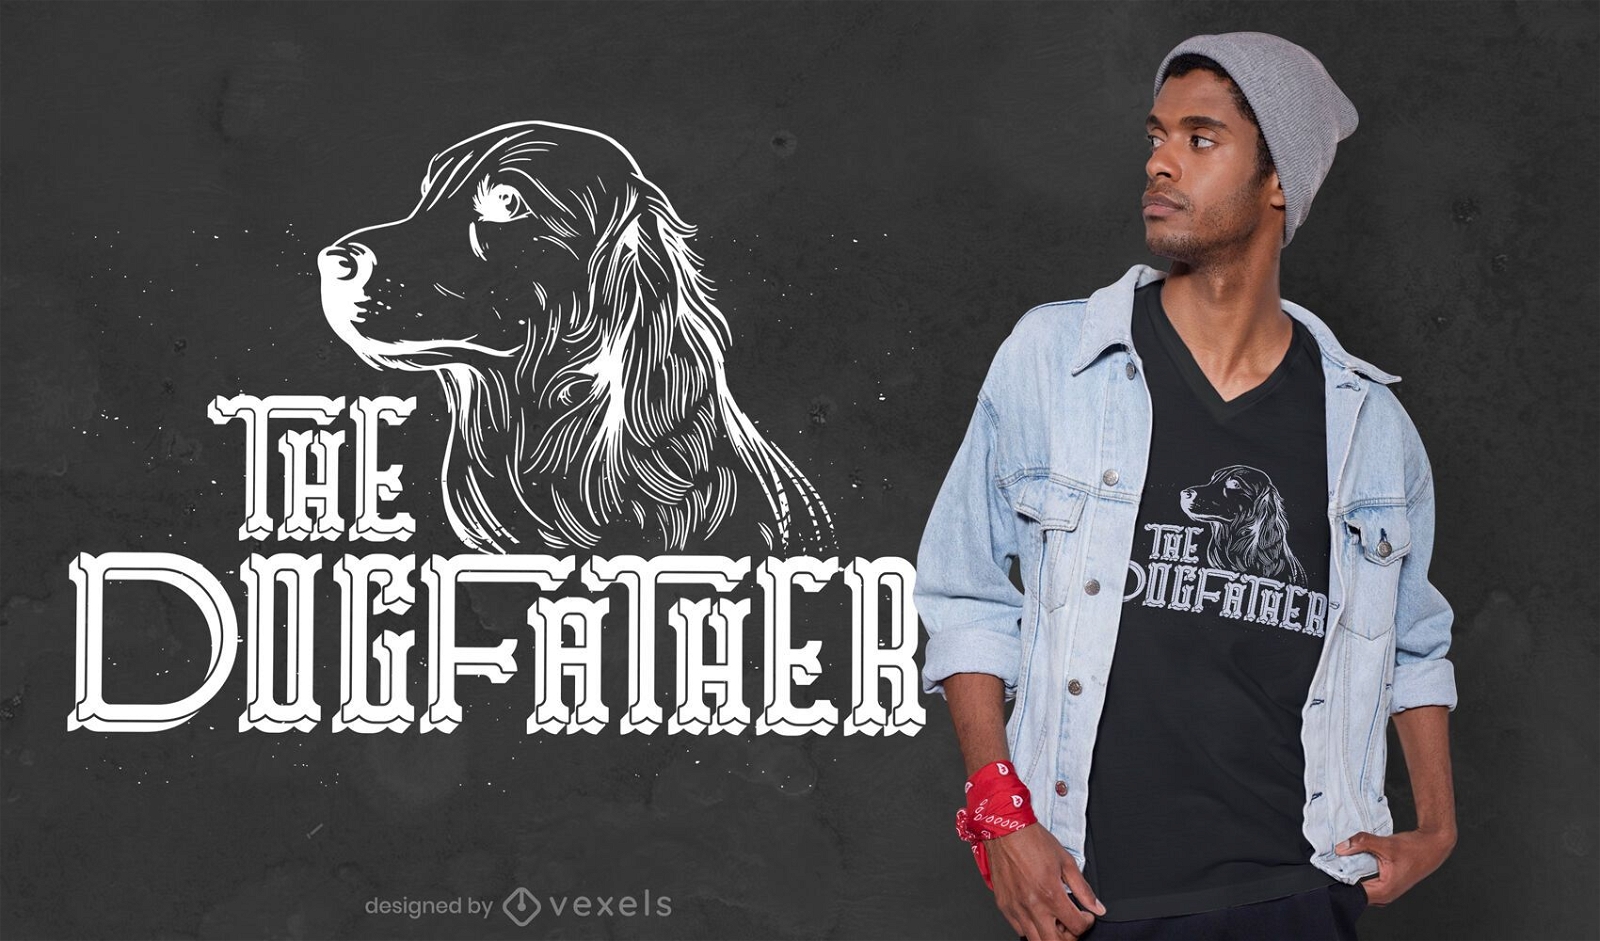 The dogfather t-shirt design